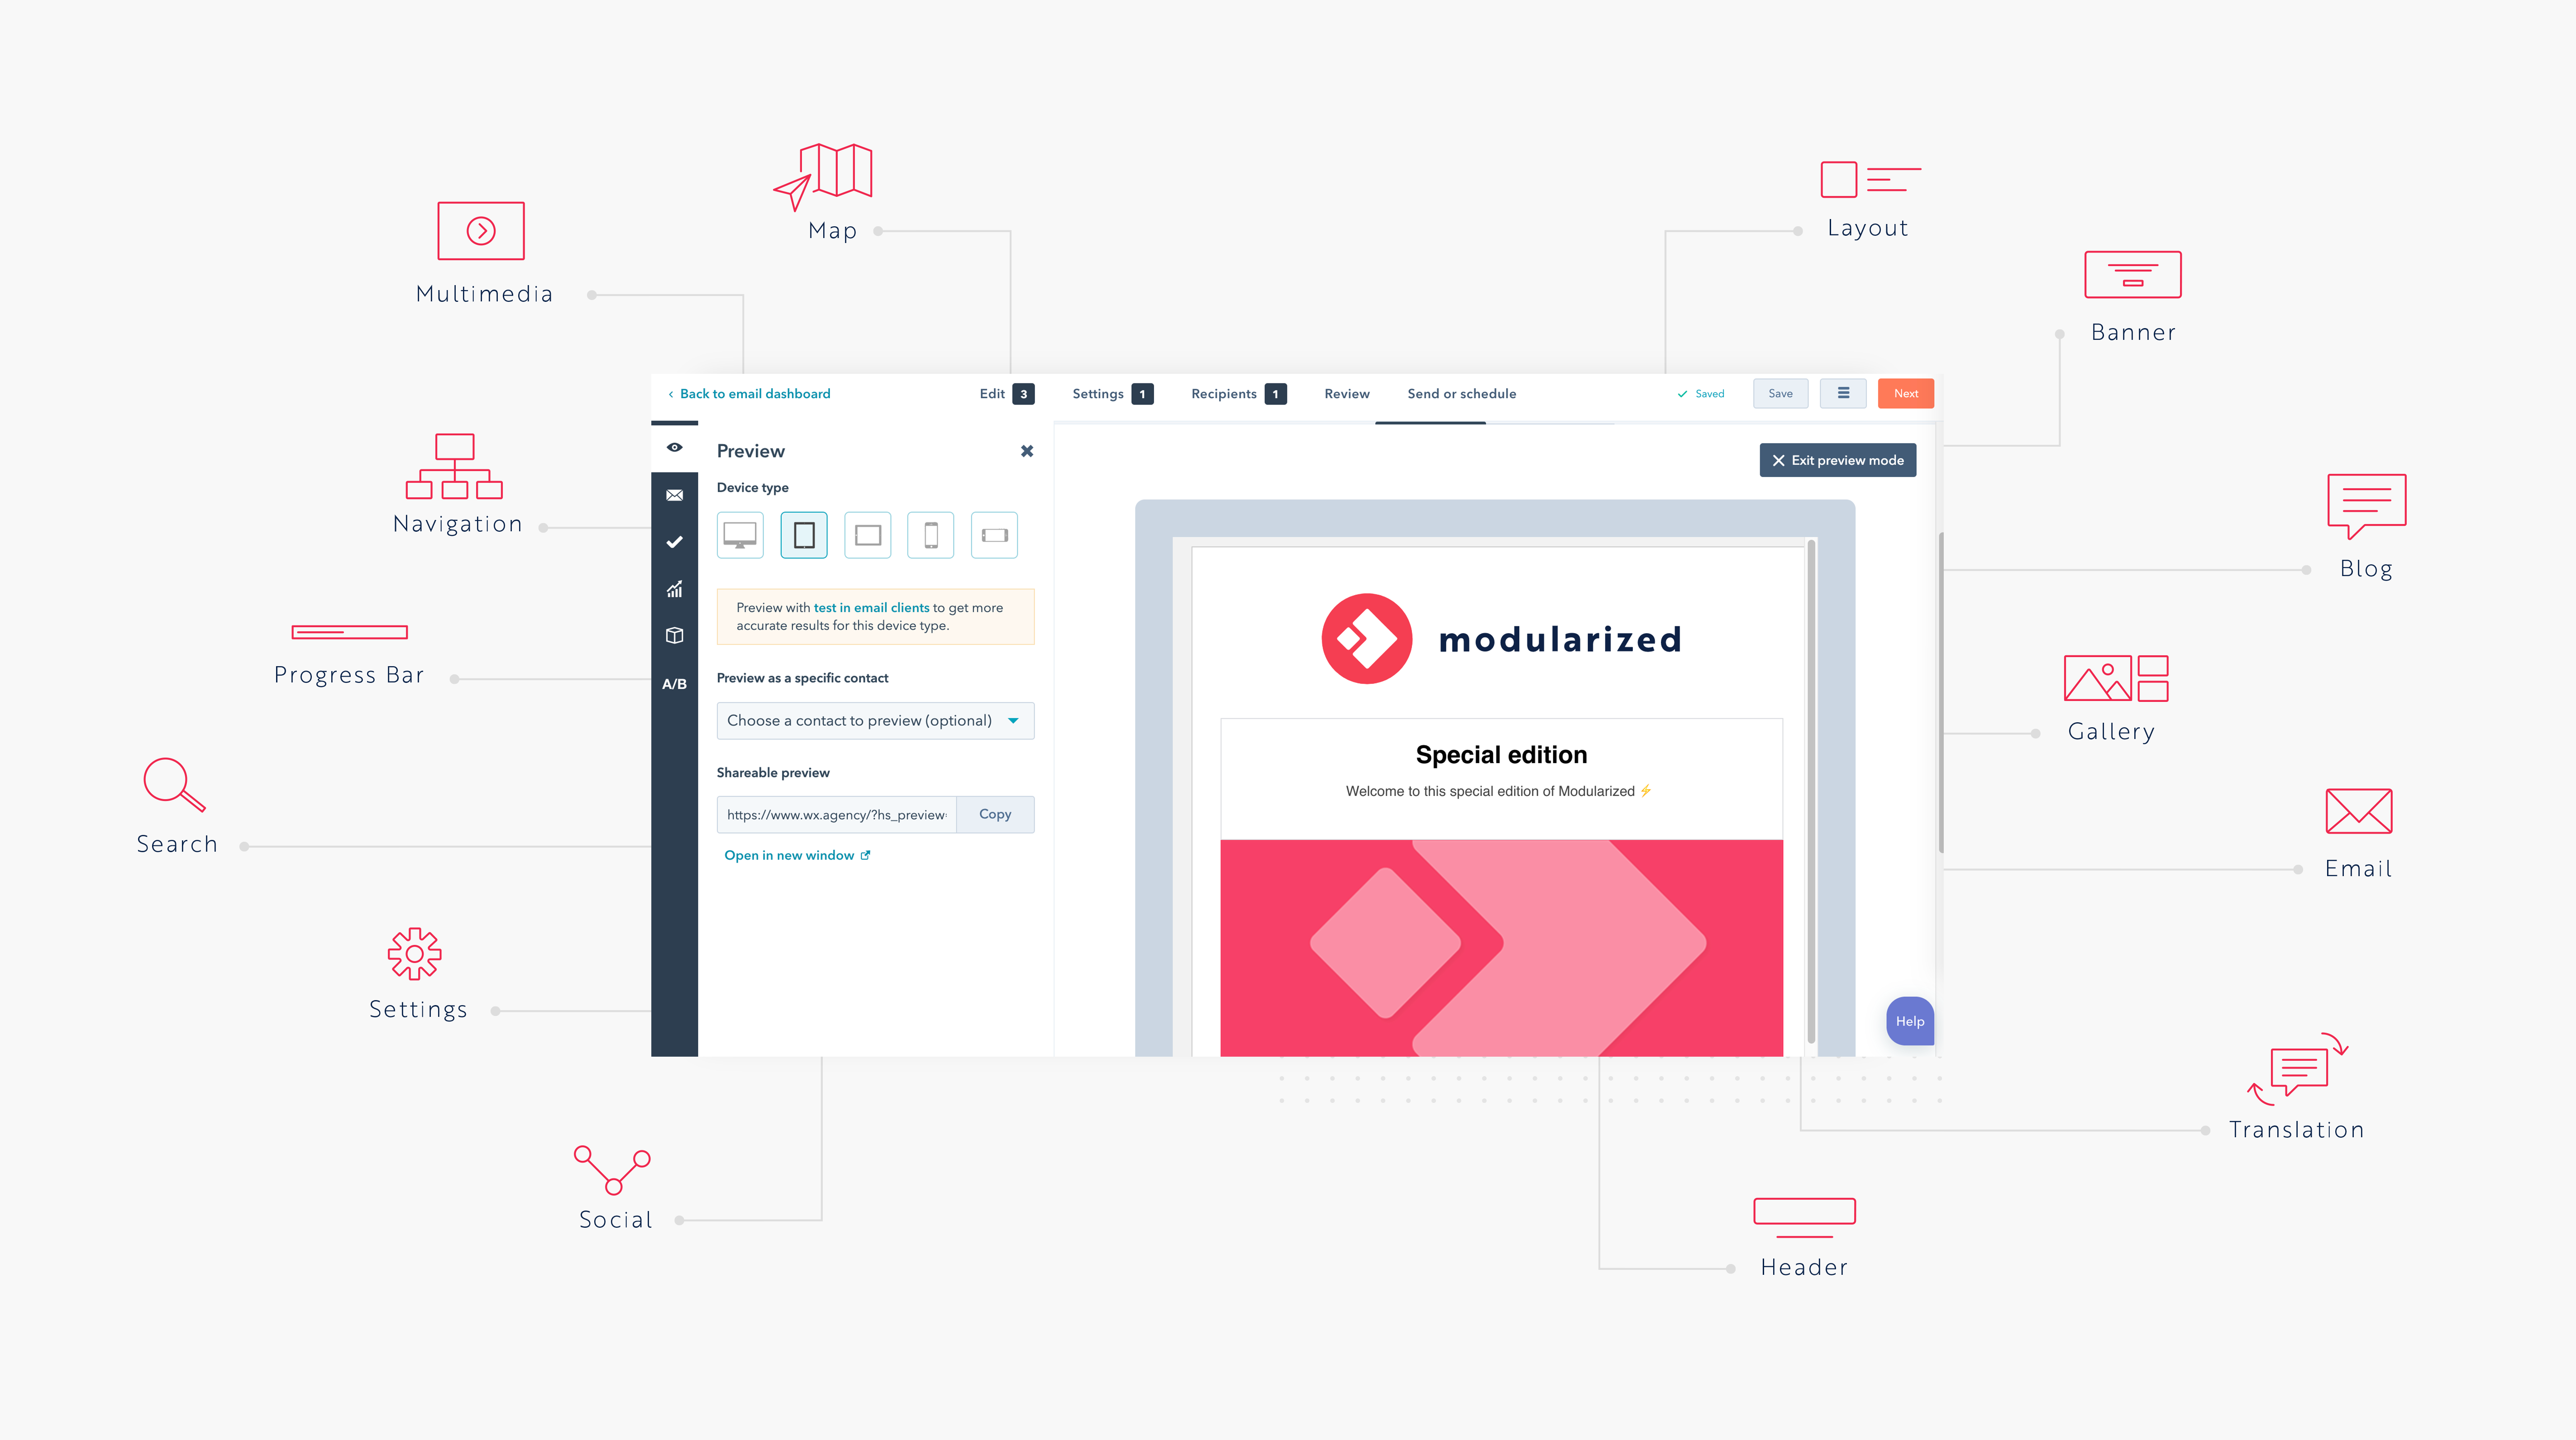 Modularized Email Template